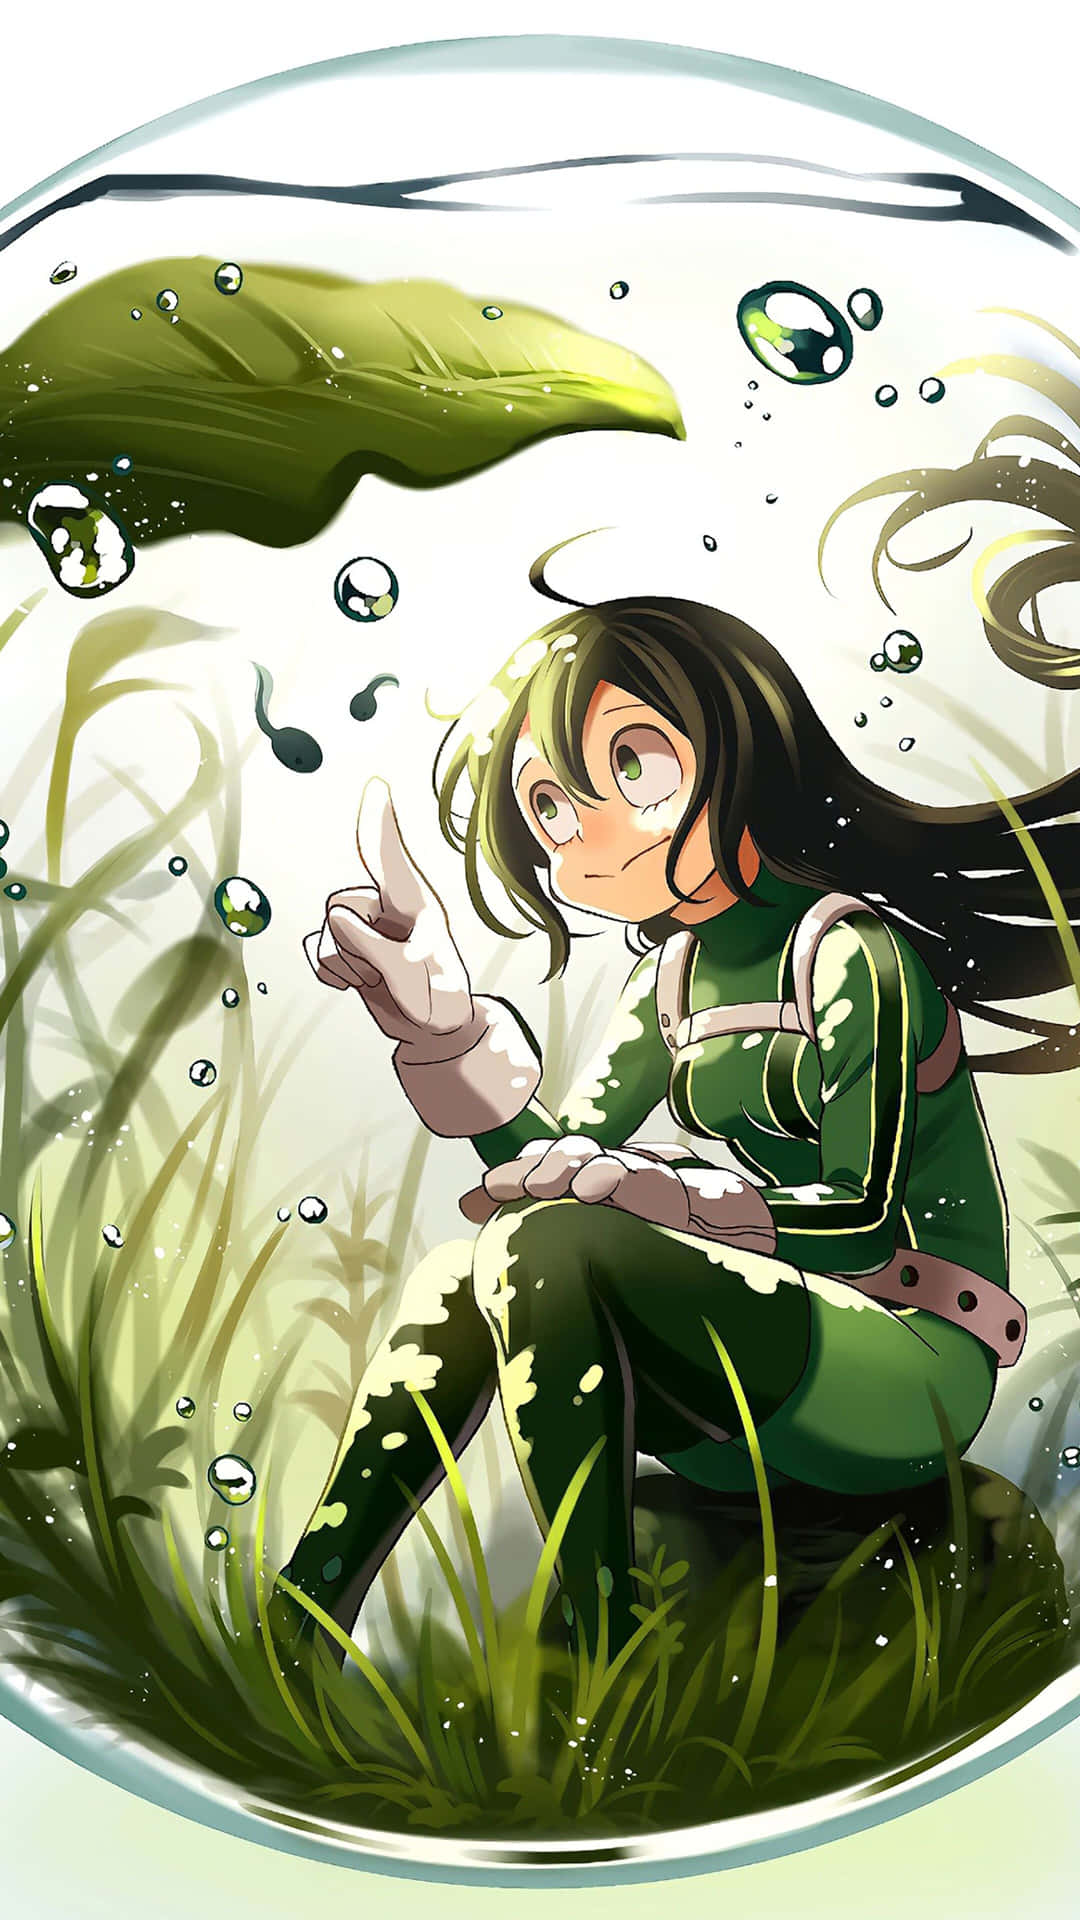 Playful Froppy Welcomes You